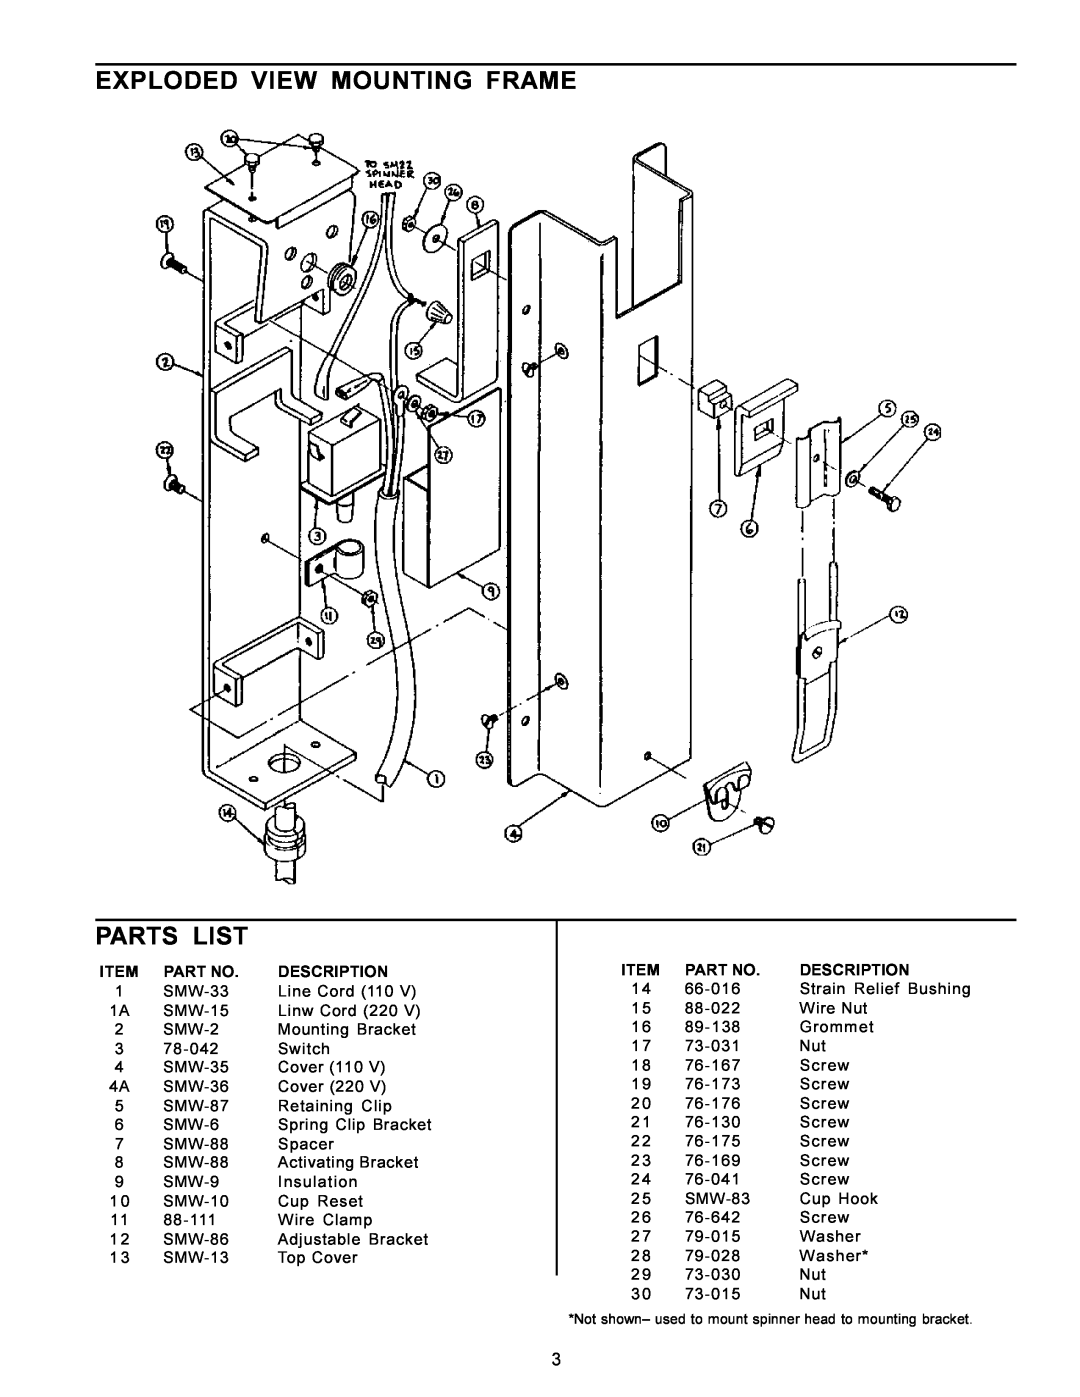 Prince Castle SMW, SM-22 specifications Exploded View Mounting Frame, Parts List, Item Part No, Description 